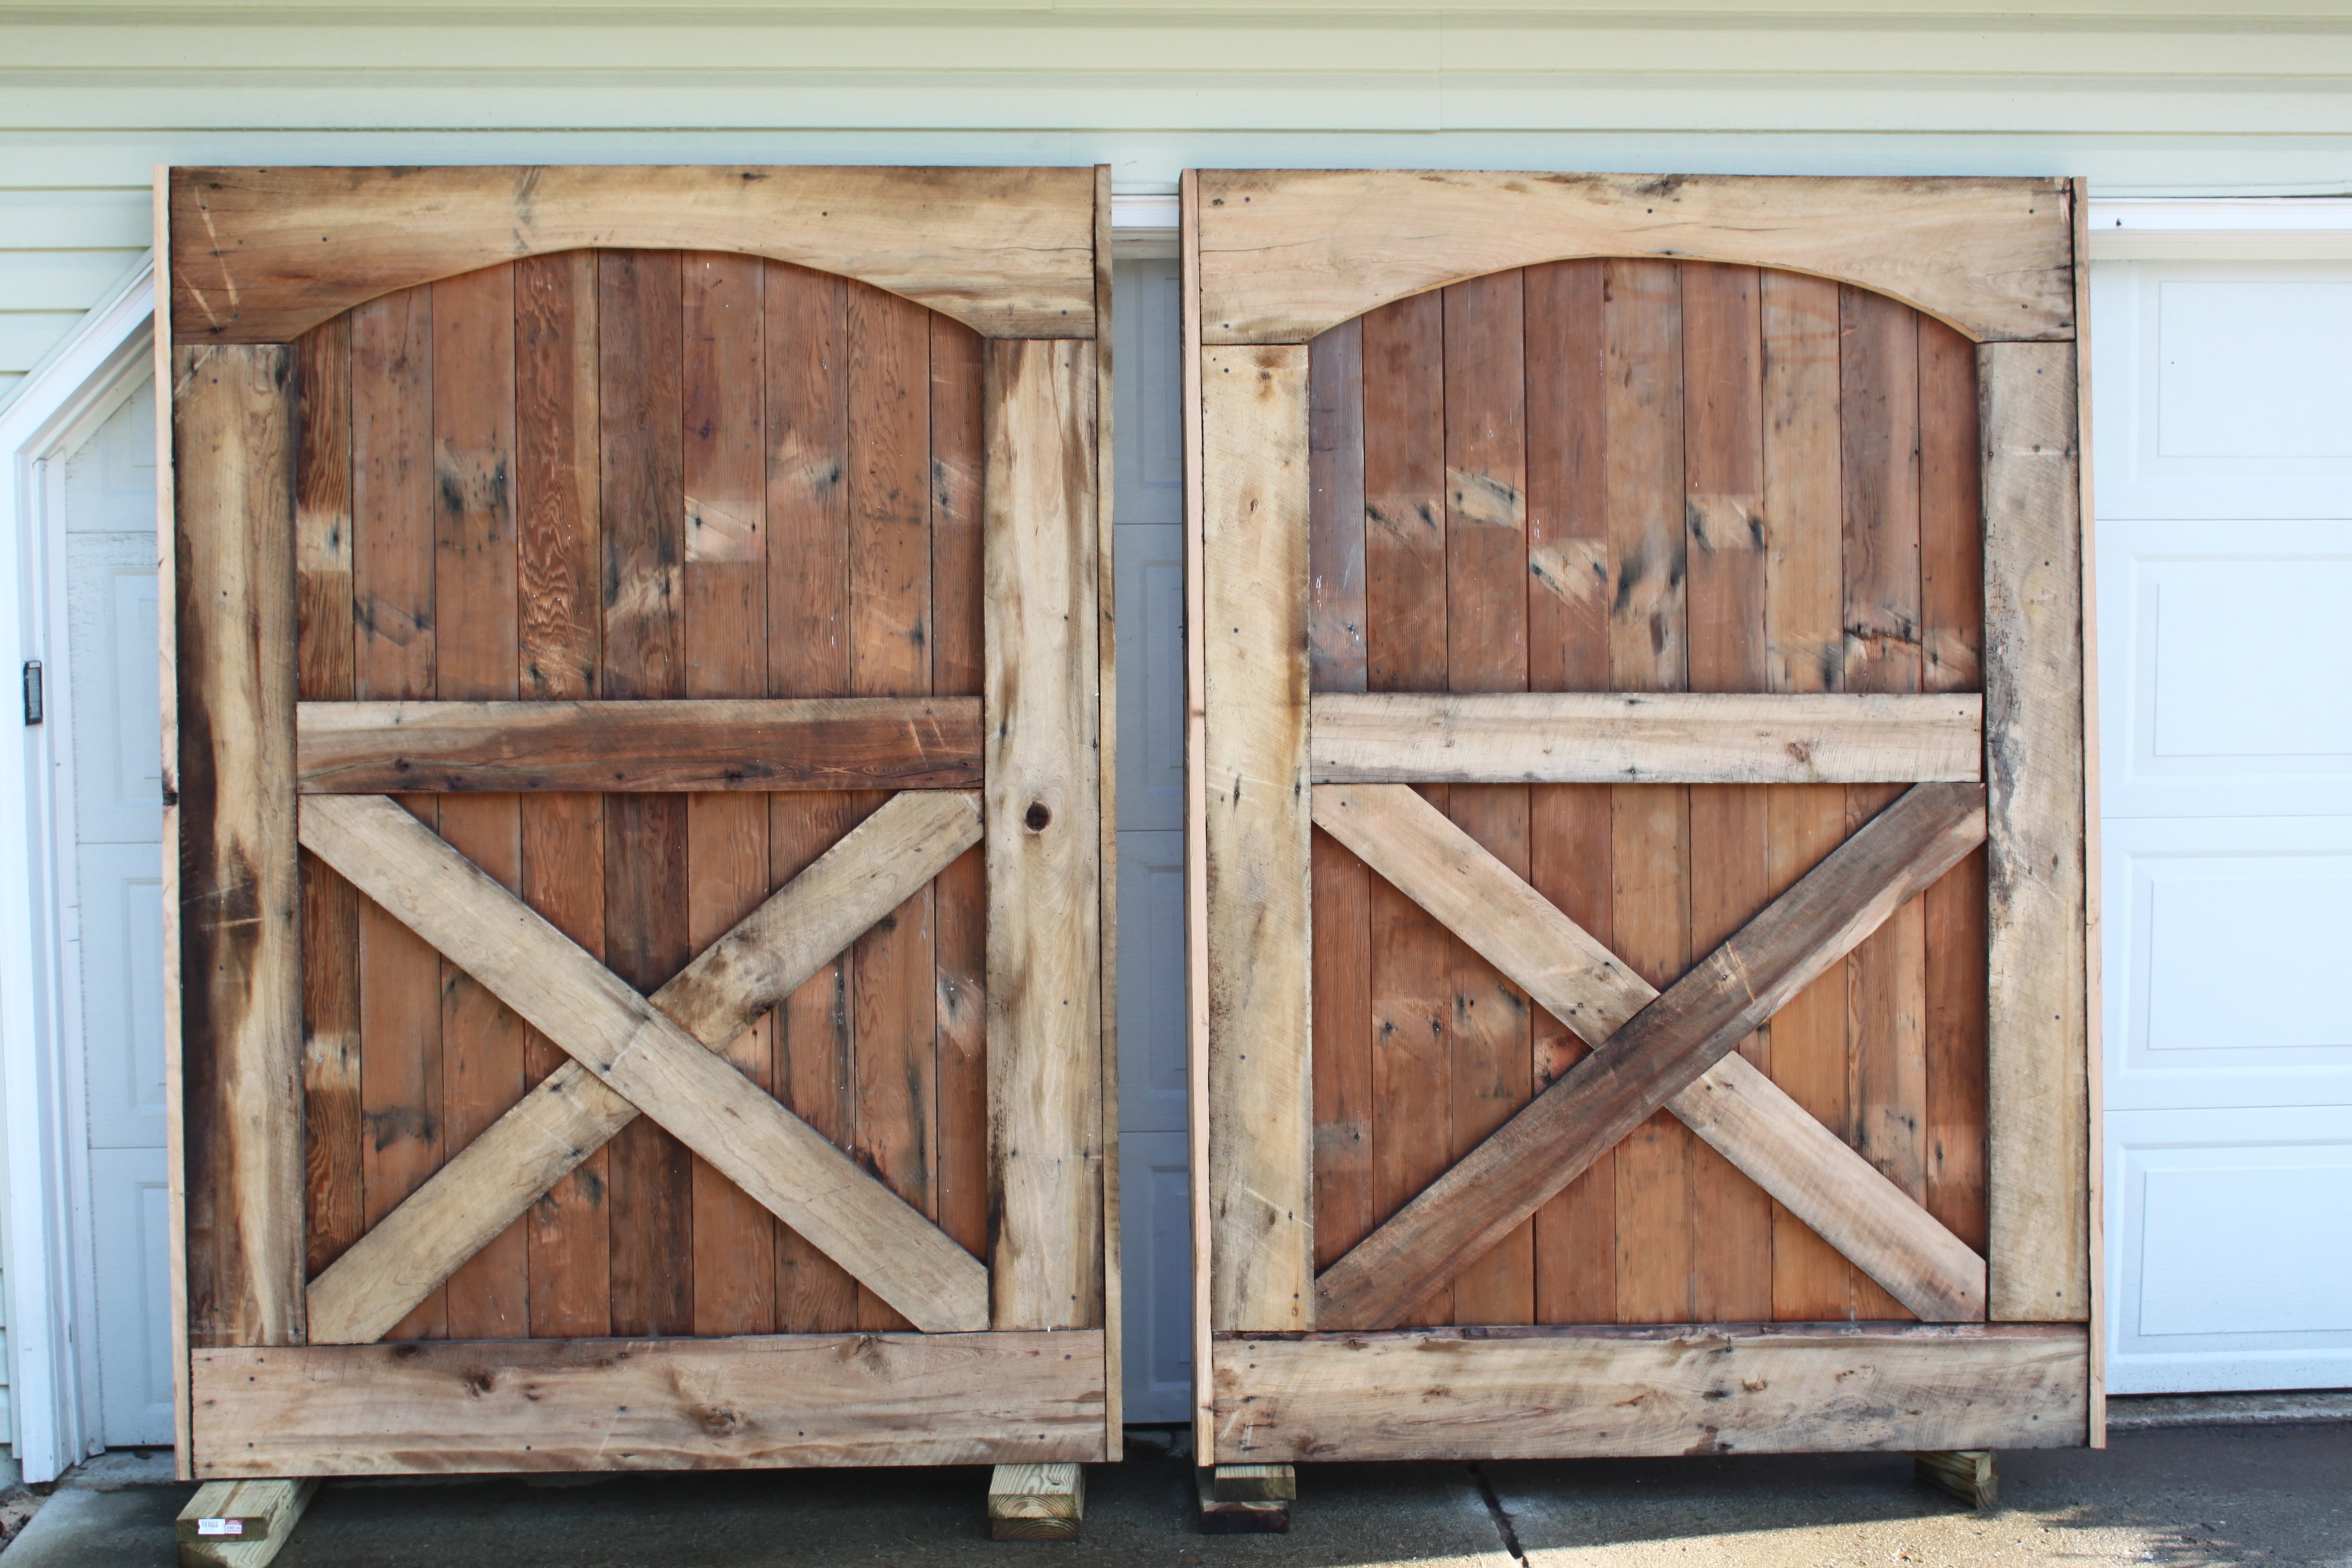  projects -the building of our barn doors from old barn flooring